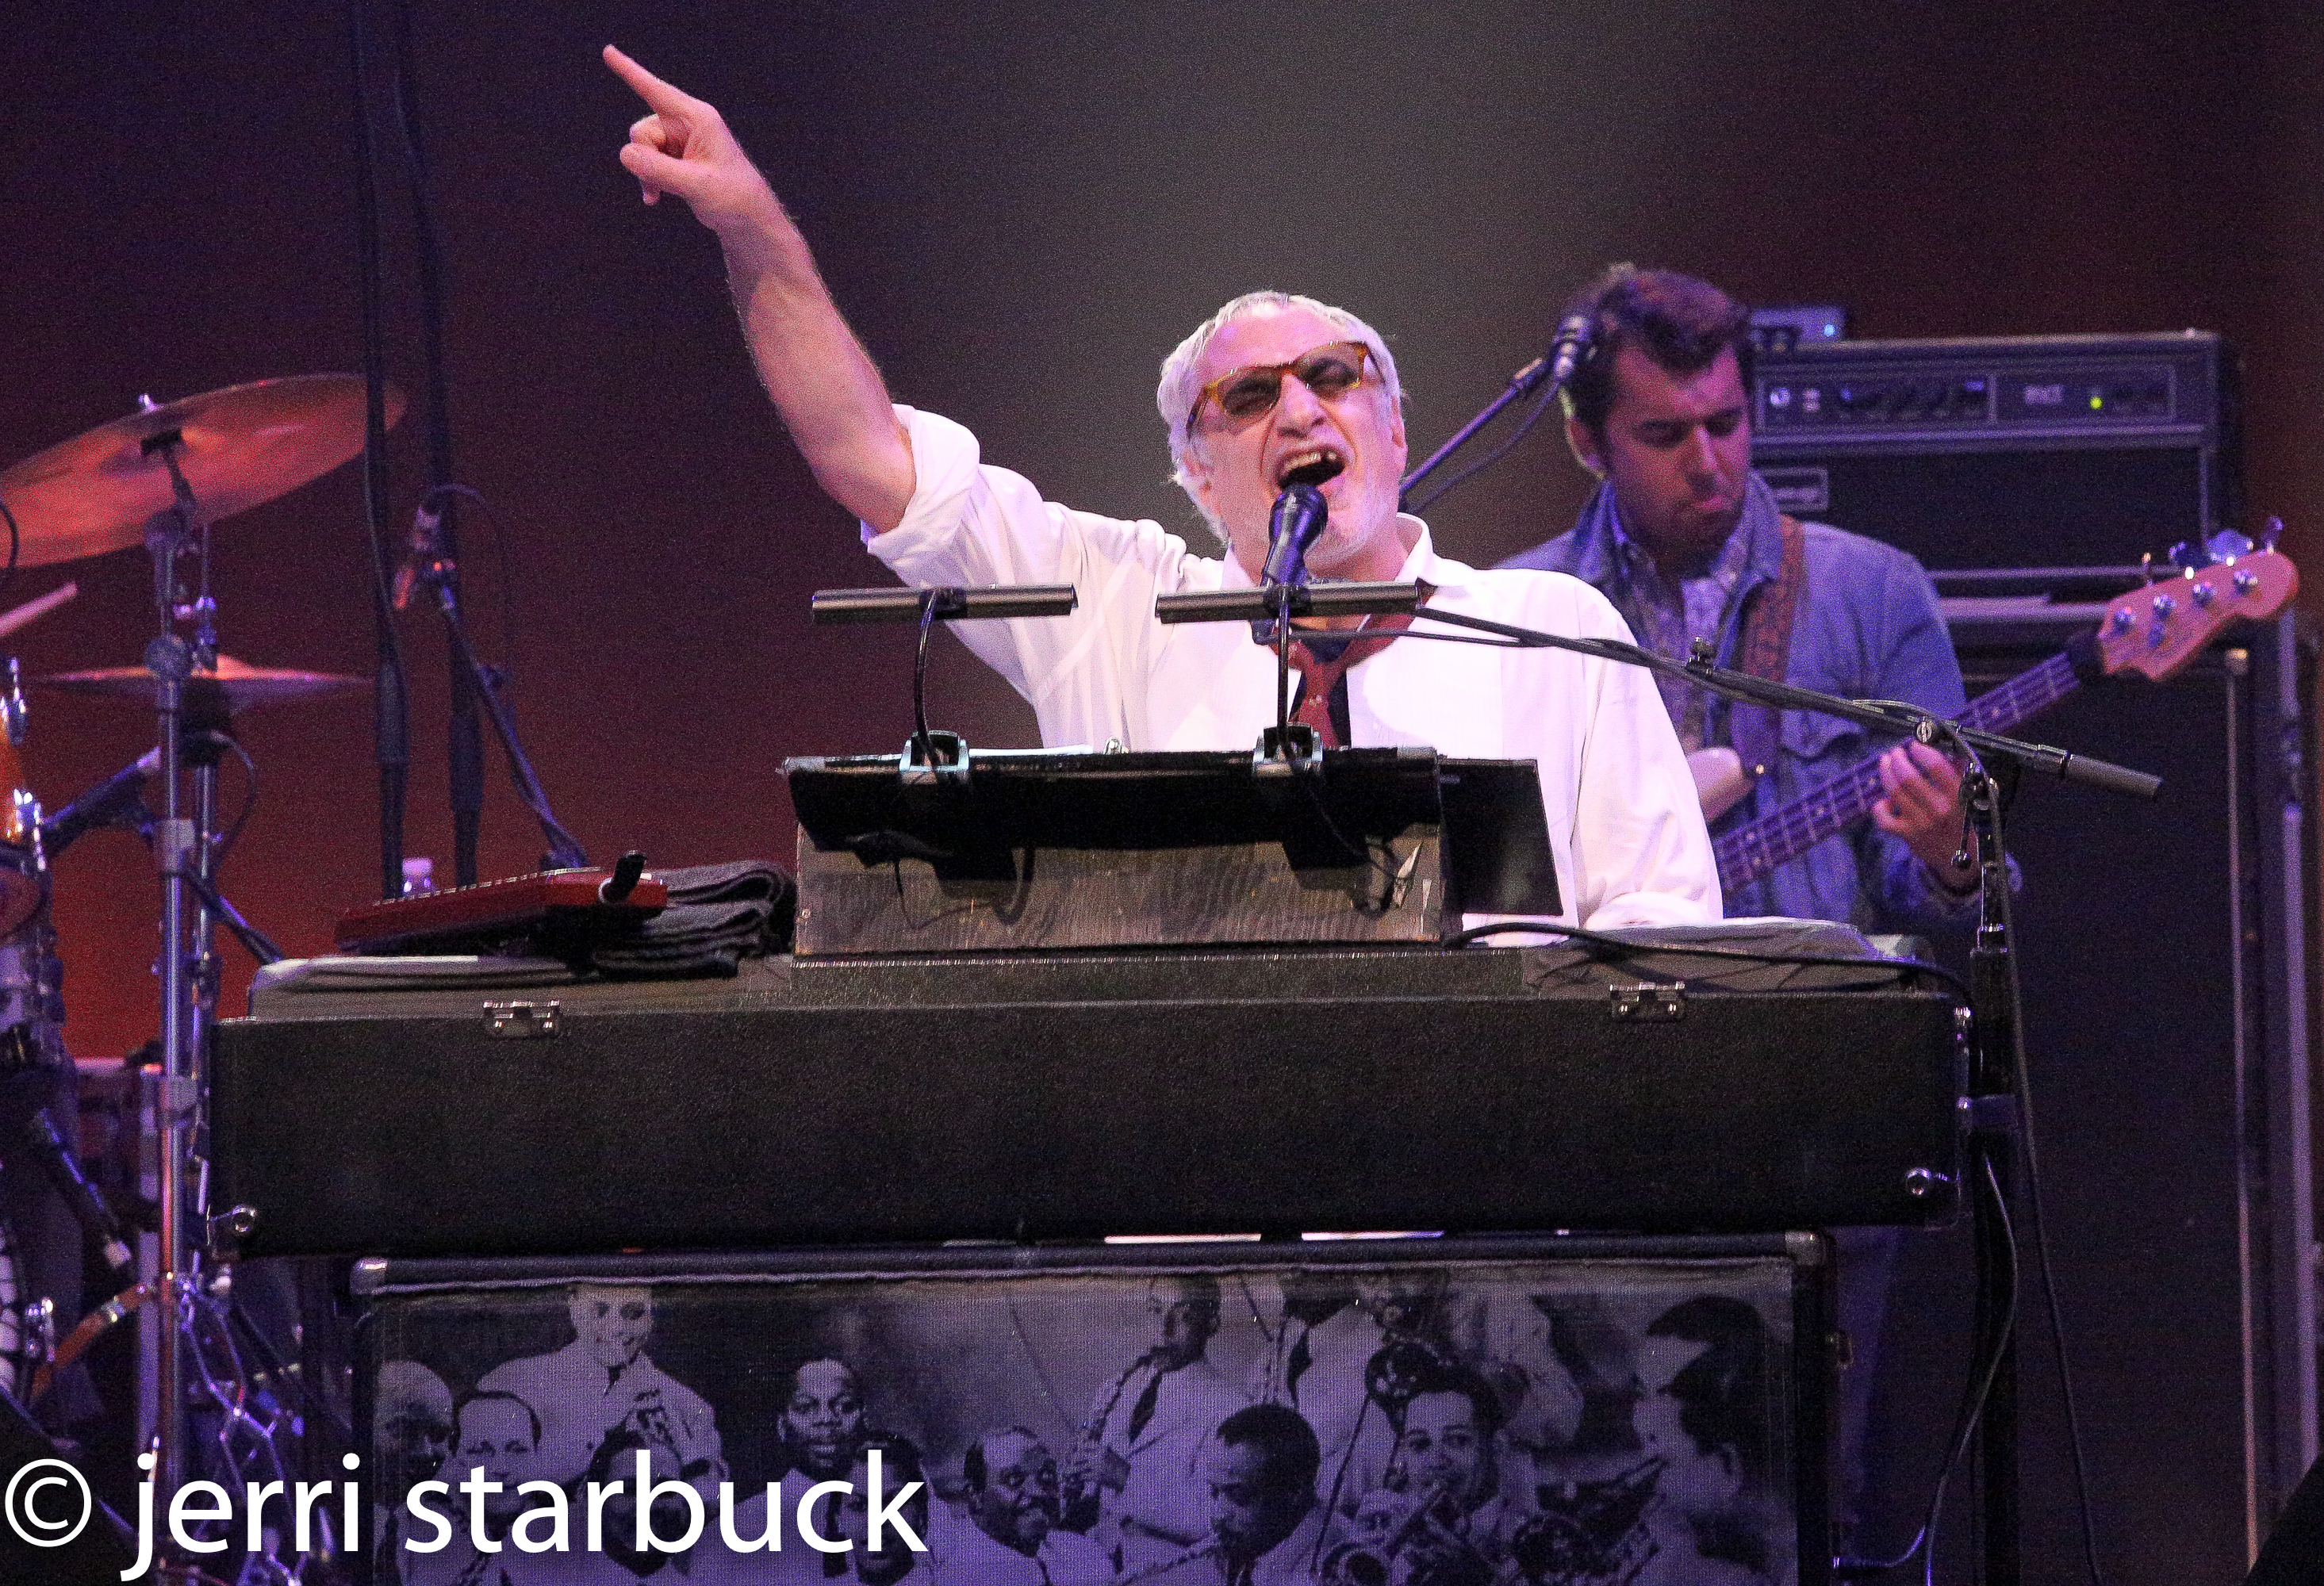 Steely Dan’s Donald Fegan Performed at ACL Live in Austin Texas